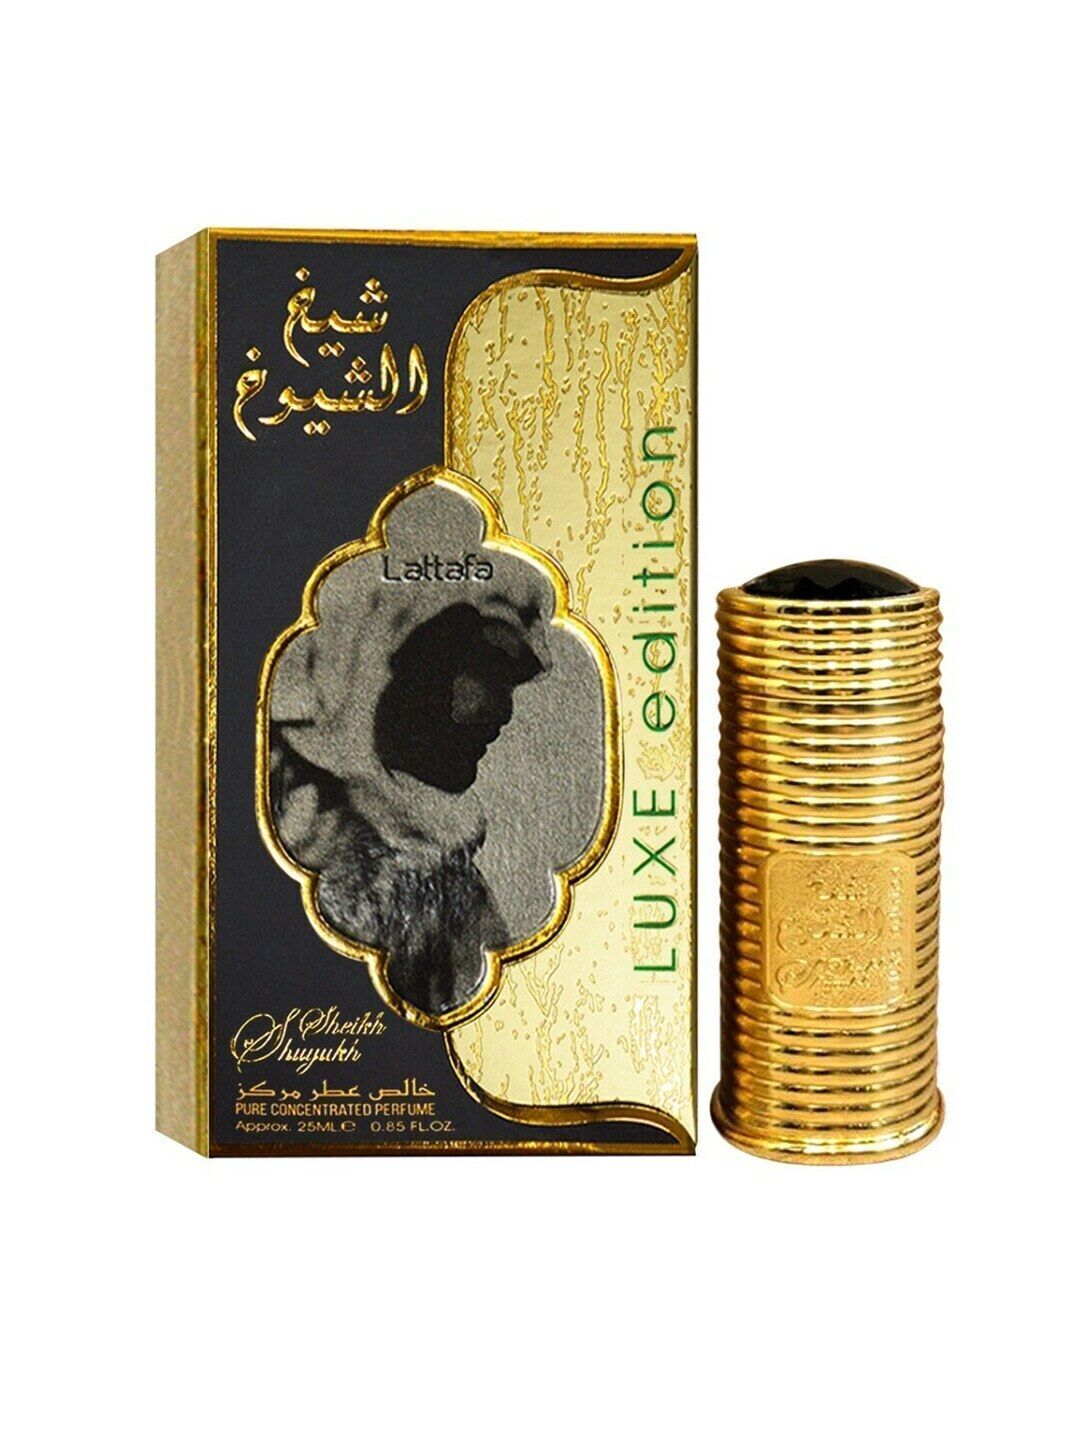 Sheikh Al Shuyukh Luxe Edition Concentrated Perfume Oil - 25ML By Lattafa - Intense Oud